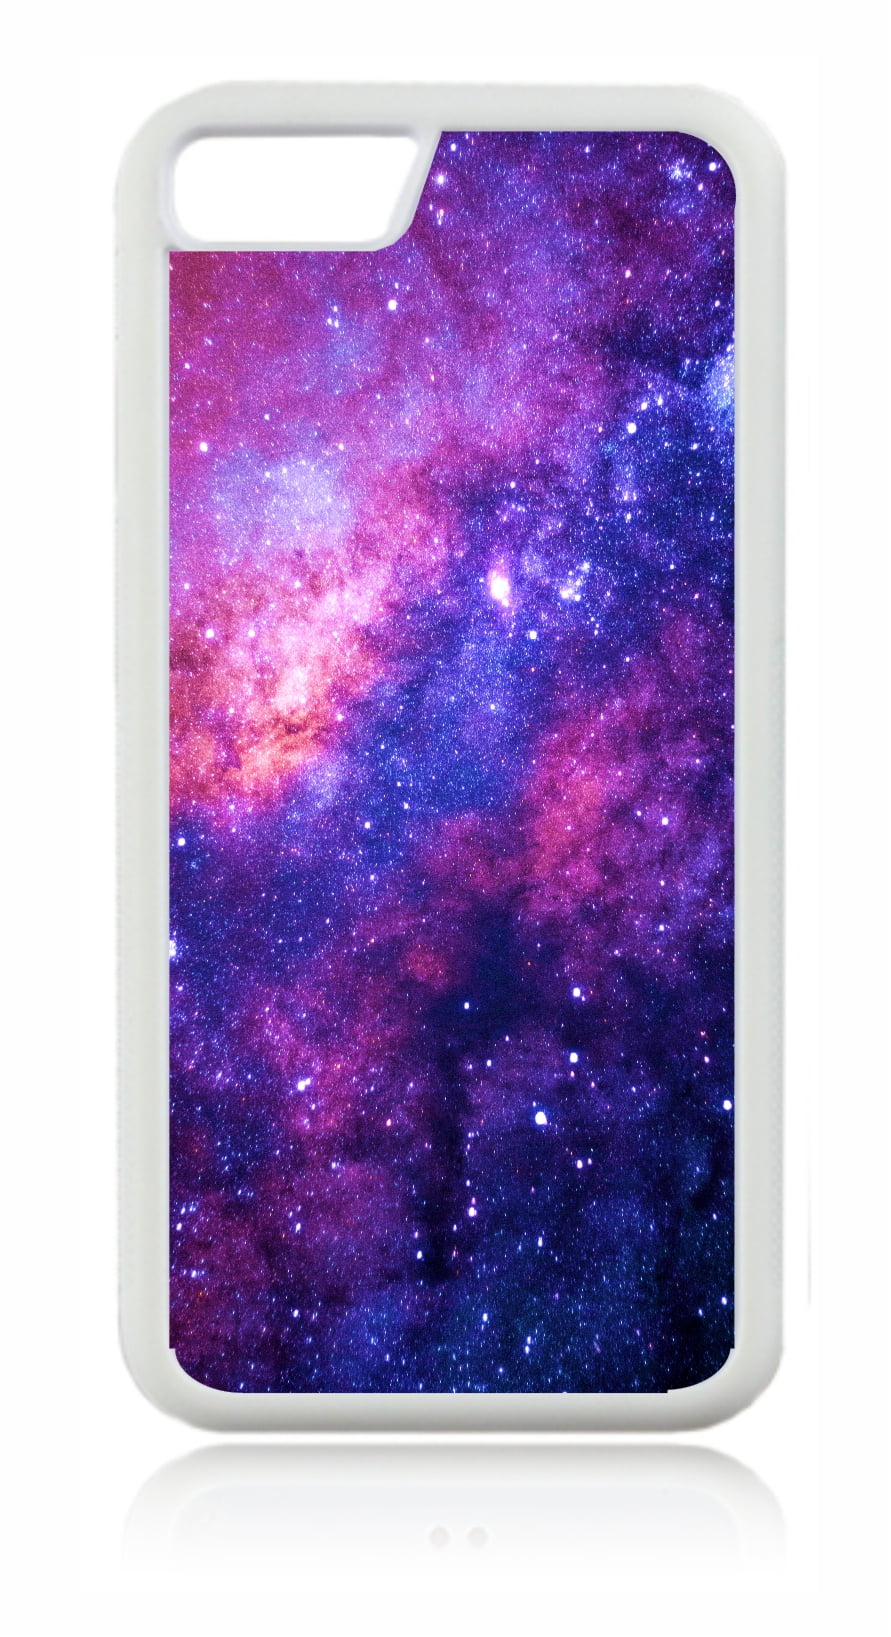 Galactic Galaxy Nebula White Rubber Case for the Apple iPhone 6 / iPhone 6s - iPhone 6 Accessories - iPhone 6s Accessories